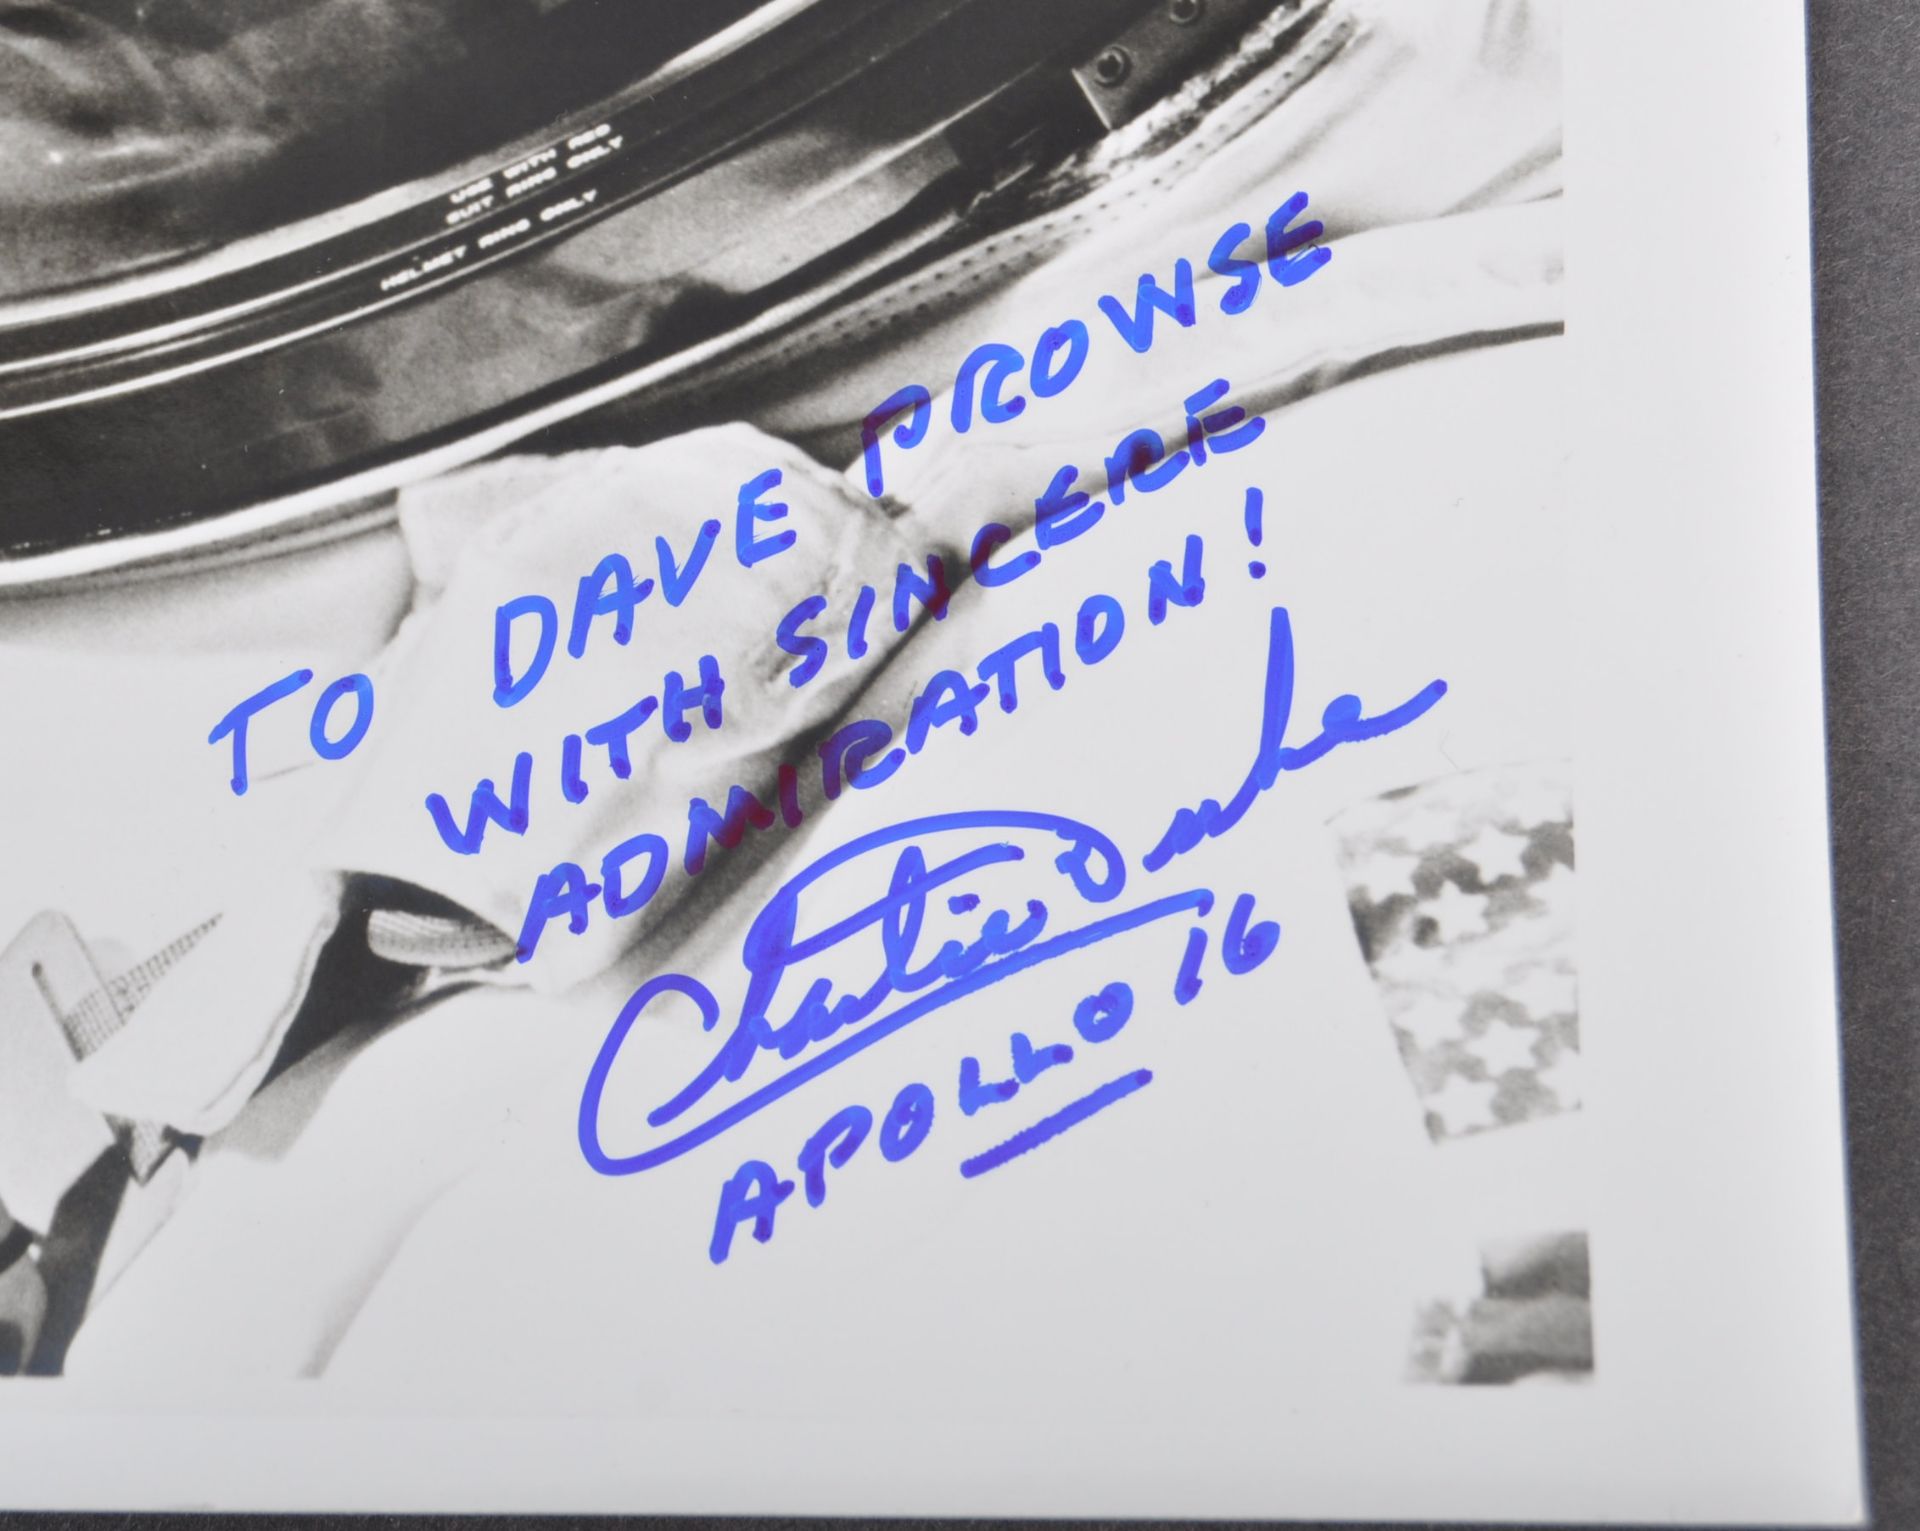 ESTATE OF DAVE PROWSE - CHARLES DUKE ASTRONAUT - DEDICATED AUTOGRAPH - Image 2 of 2